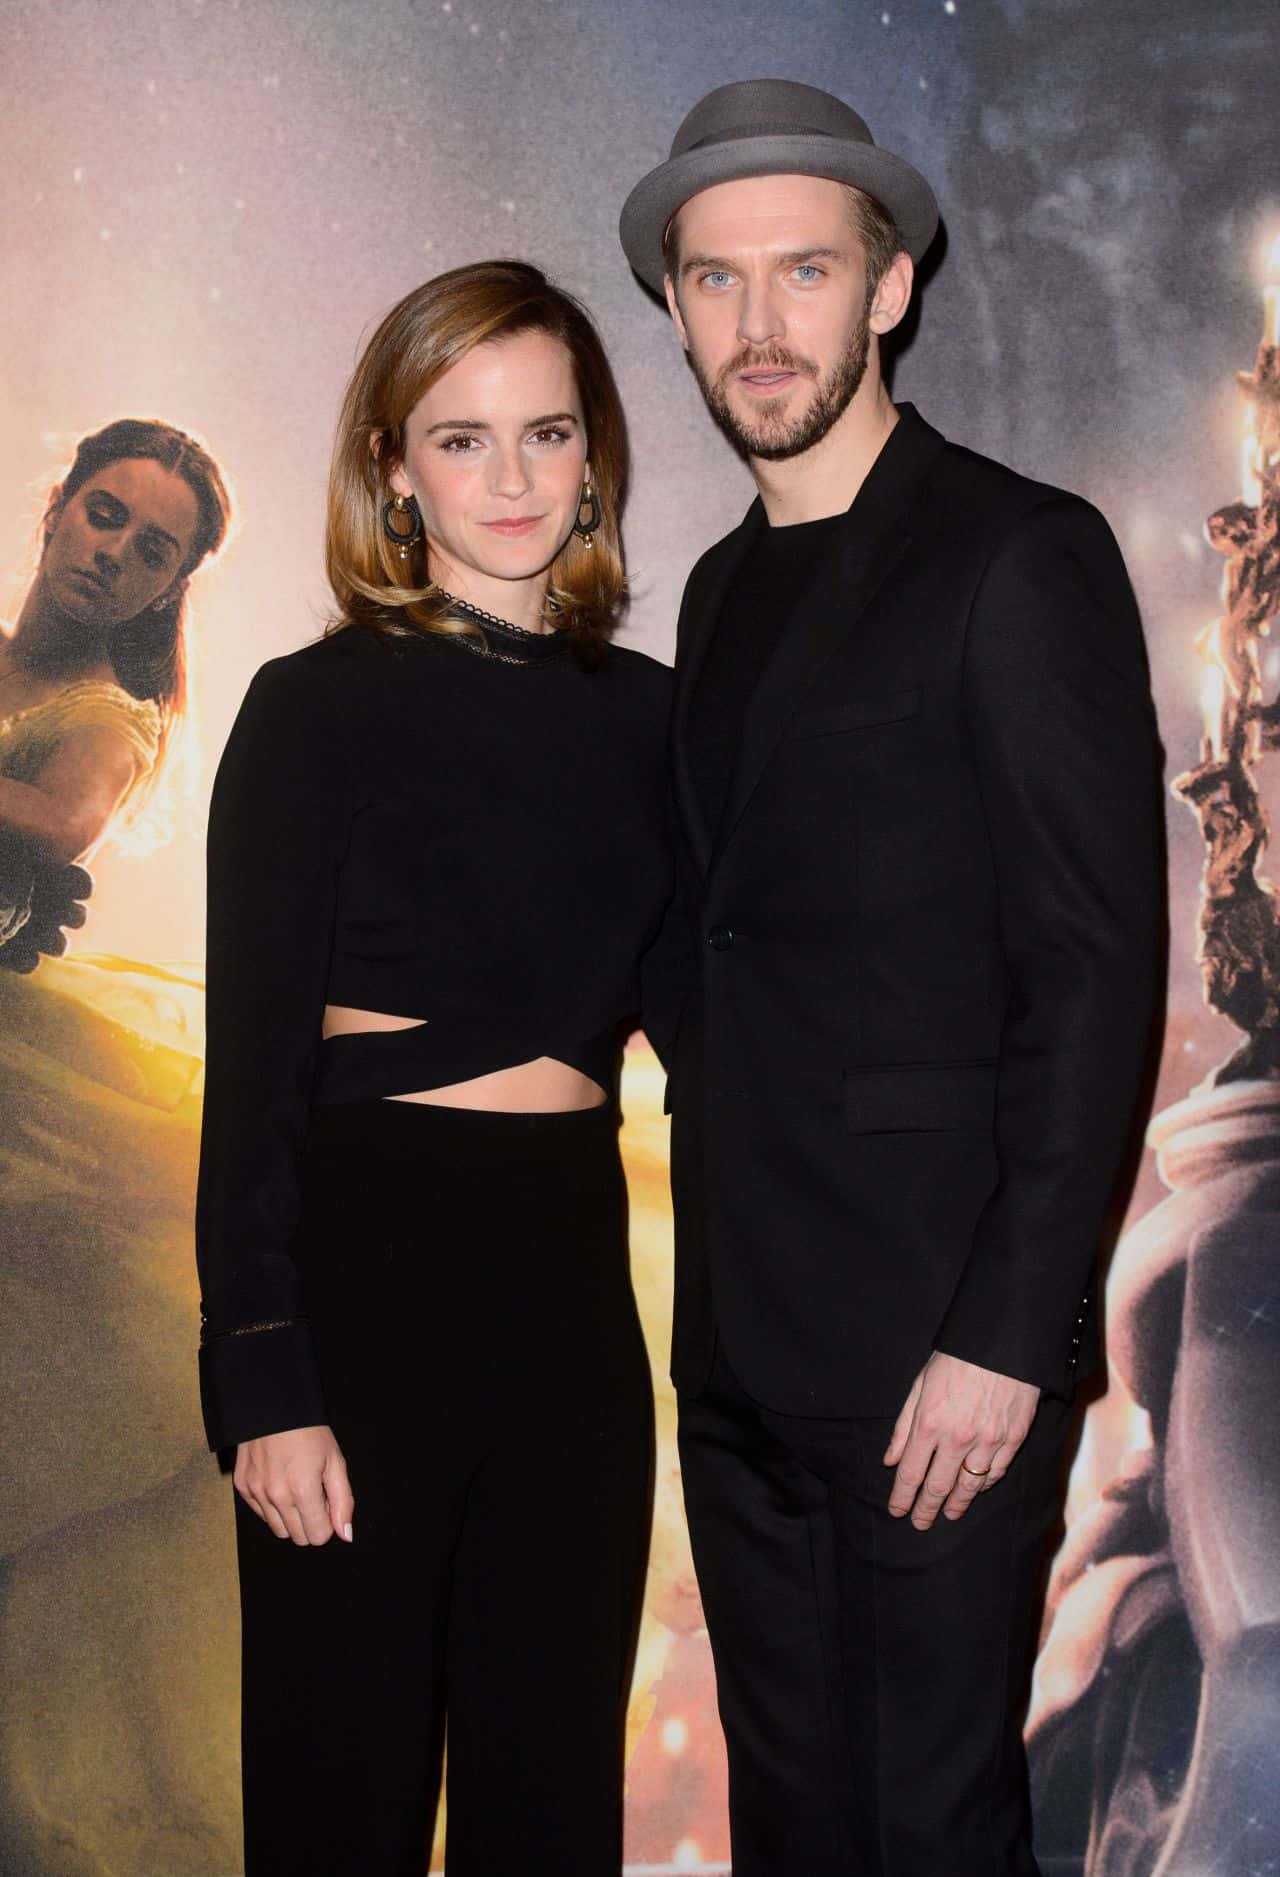 Emma Watson Was Spectacular at the "Beauty And The Beast" Photocall